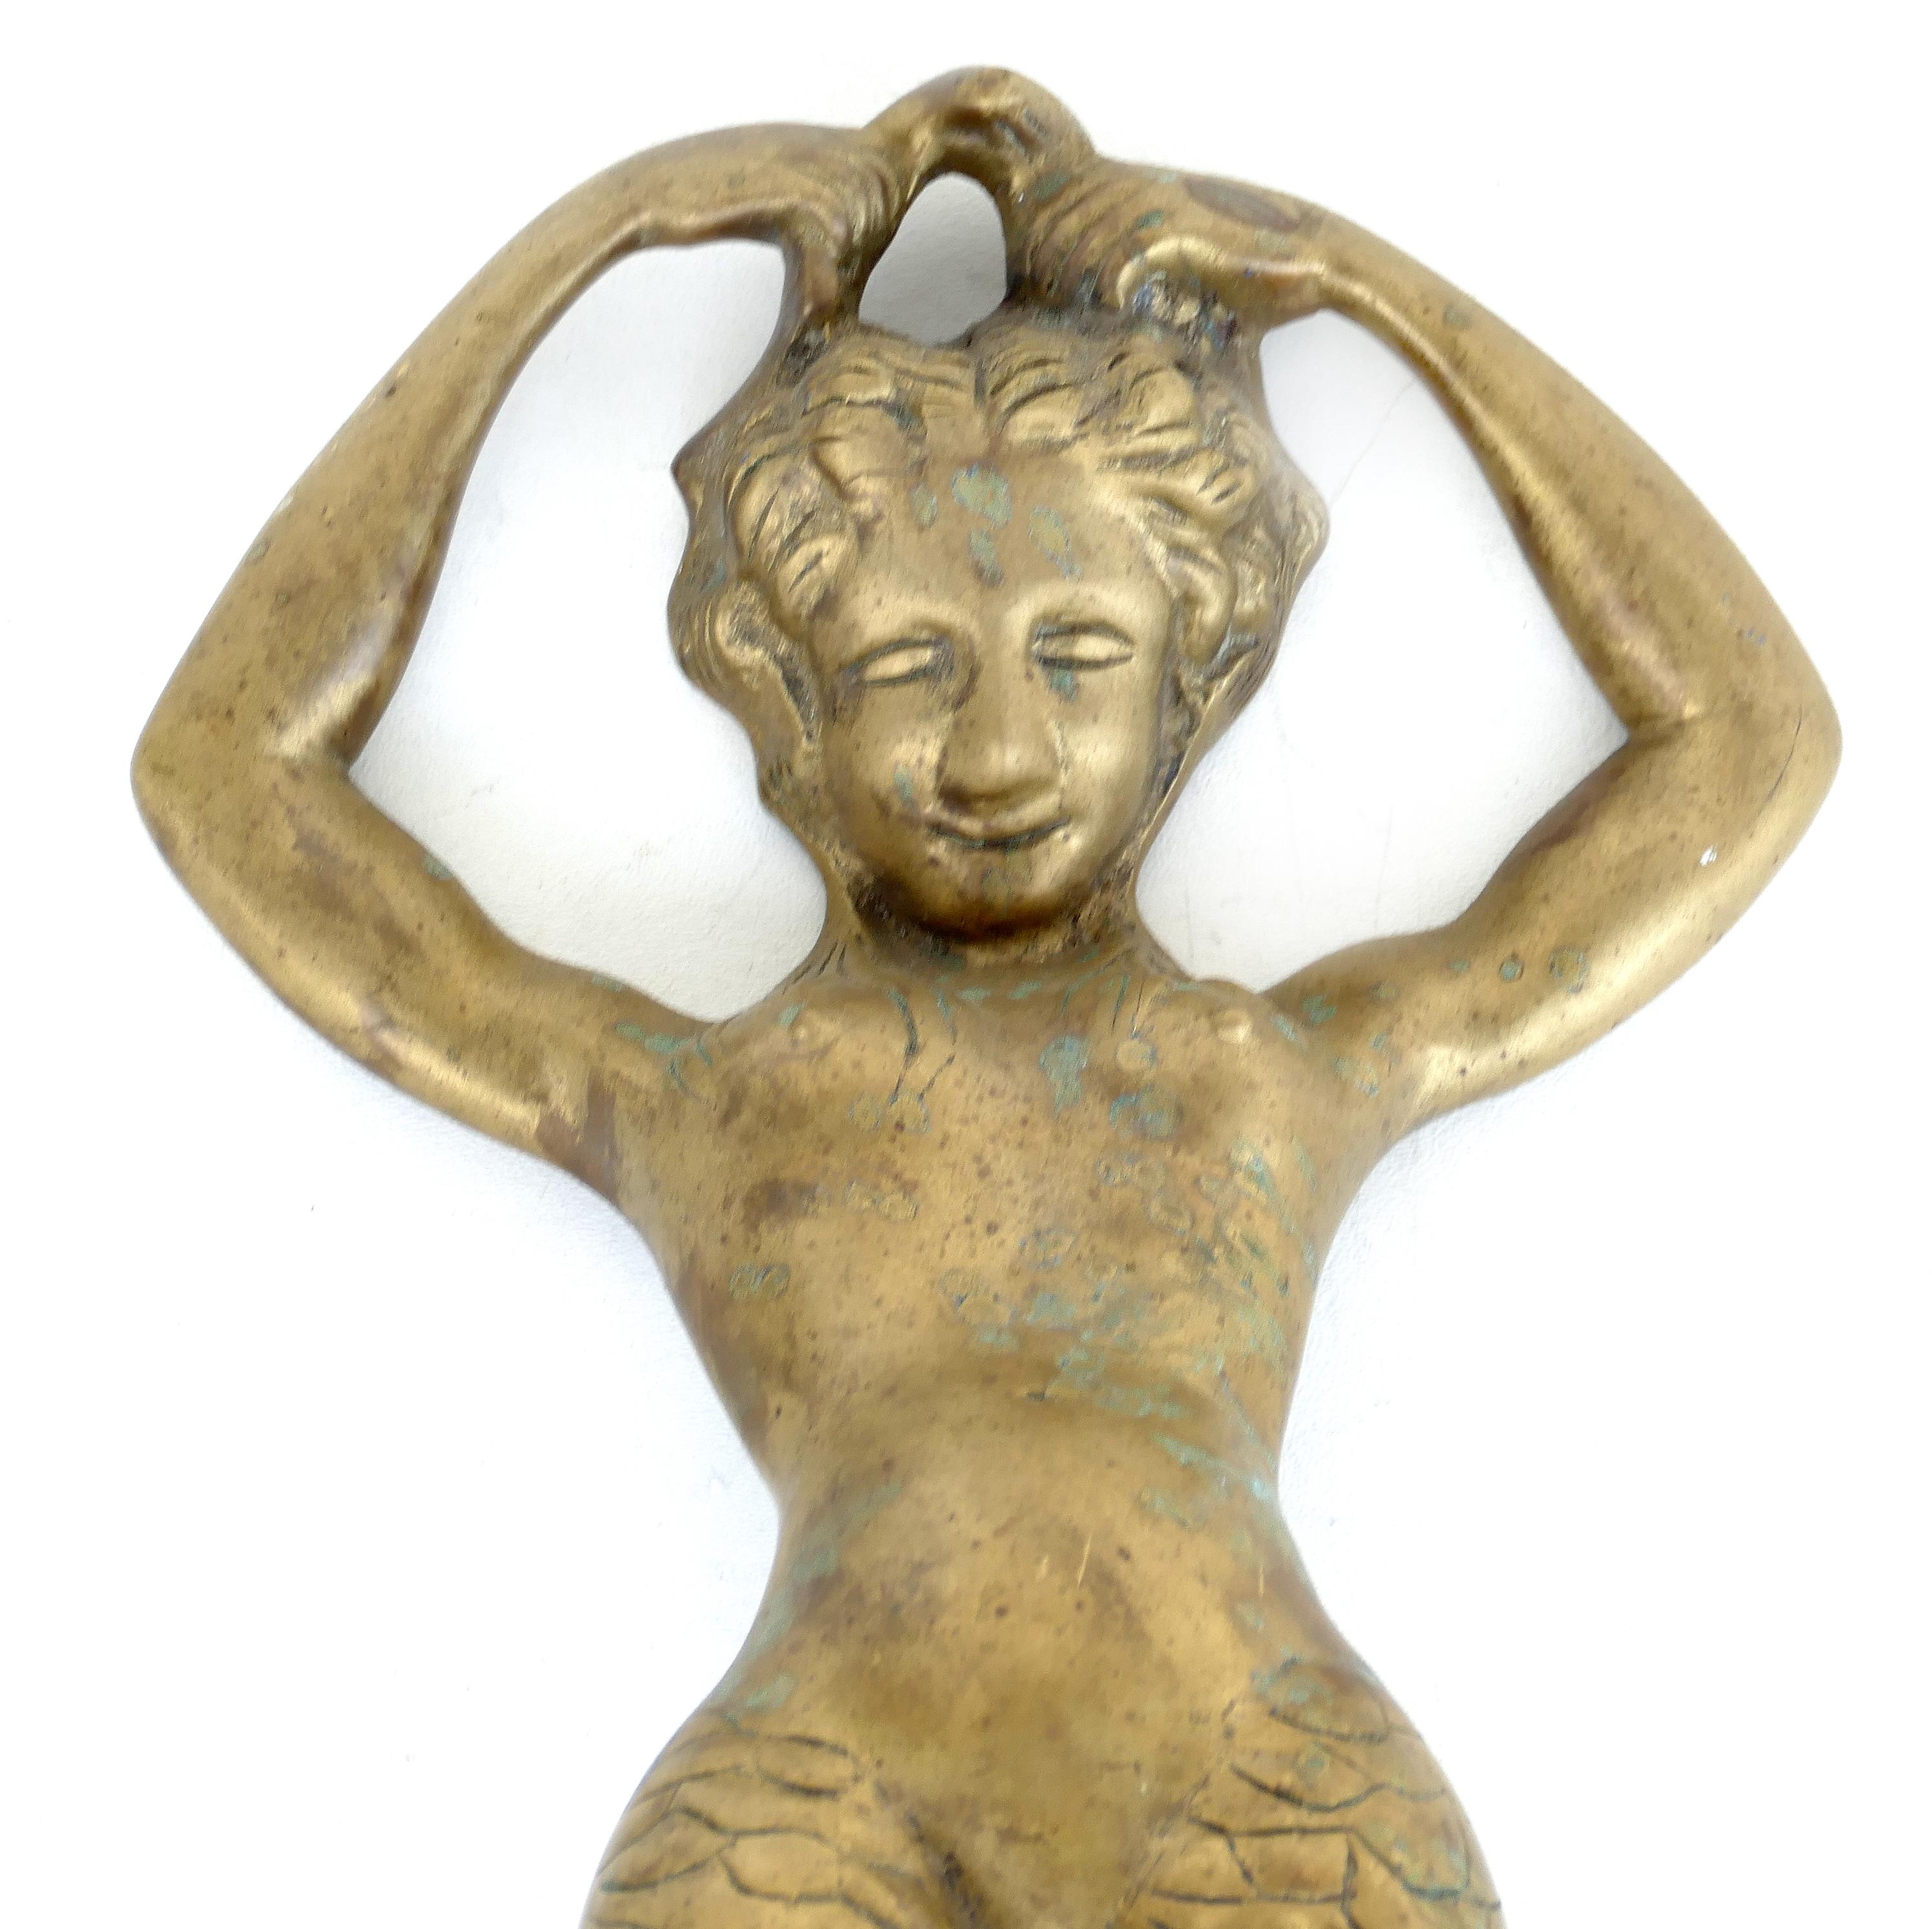 Monumental bronze mermaid handles or door knockers

Offered for sale is an overscale and substantial pair of bronze figural handles depicting mermaids. They could be retrofitted for use as door knockers  Each figure arches forward to create a